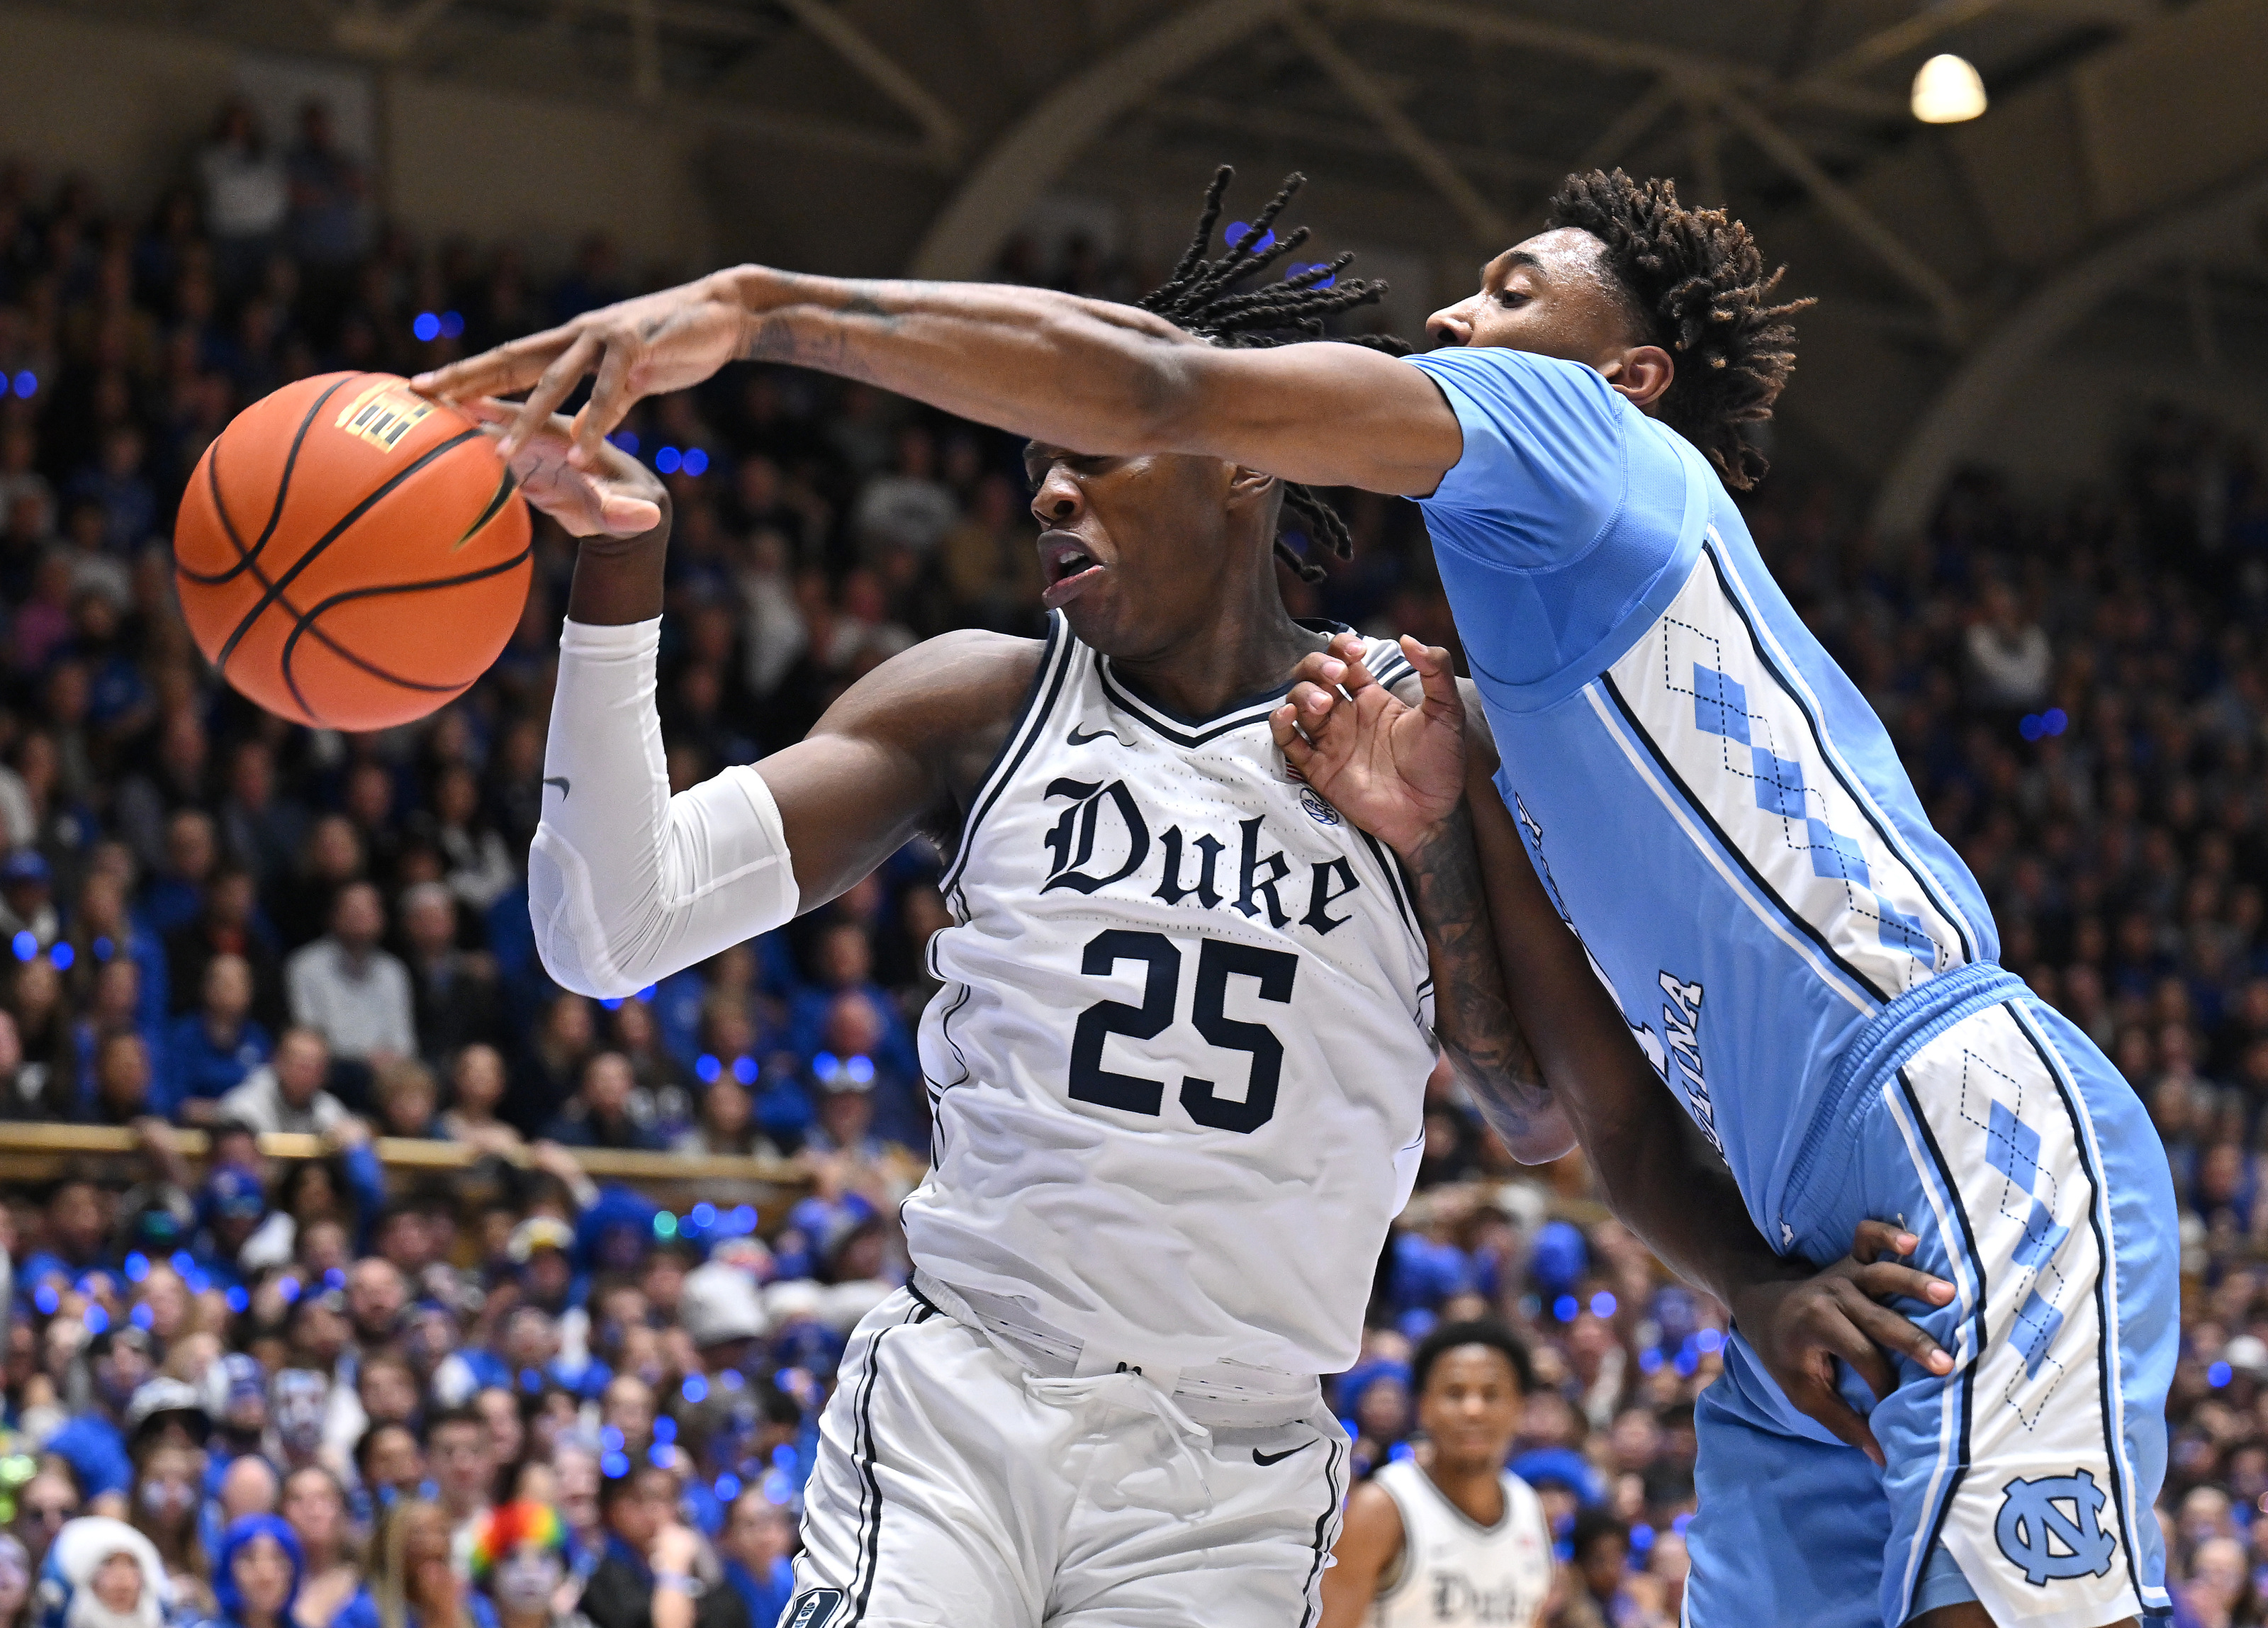 UNC Basketball shows true colors in road loss to Duke